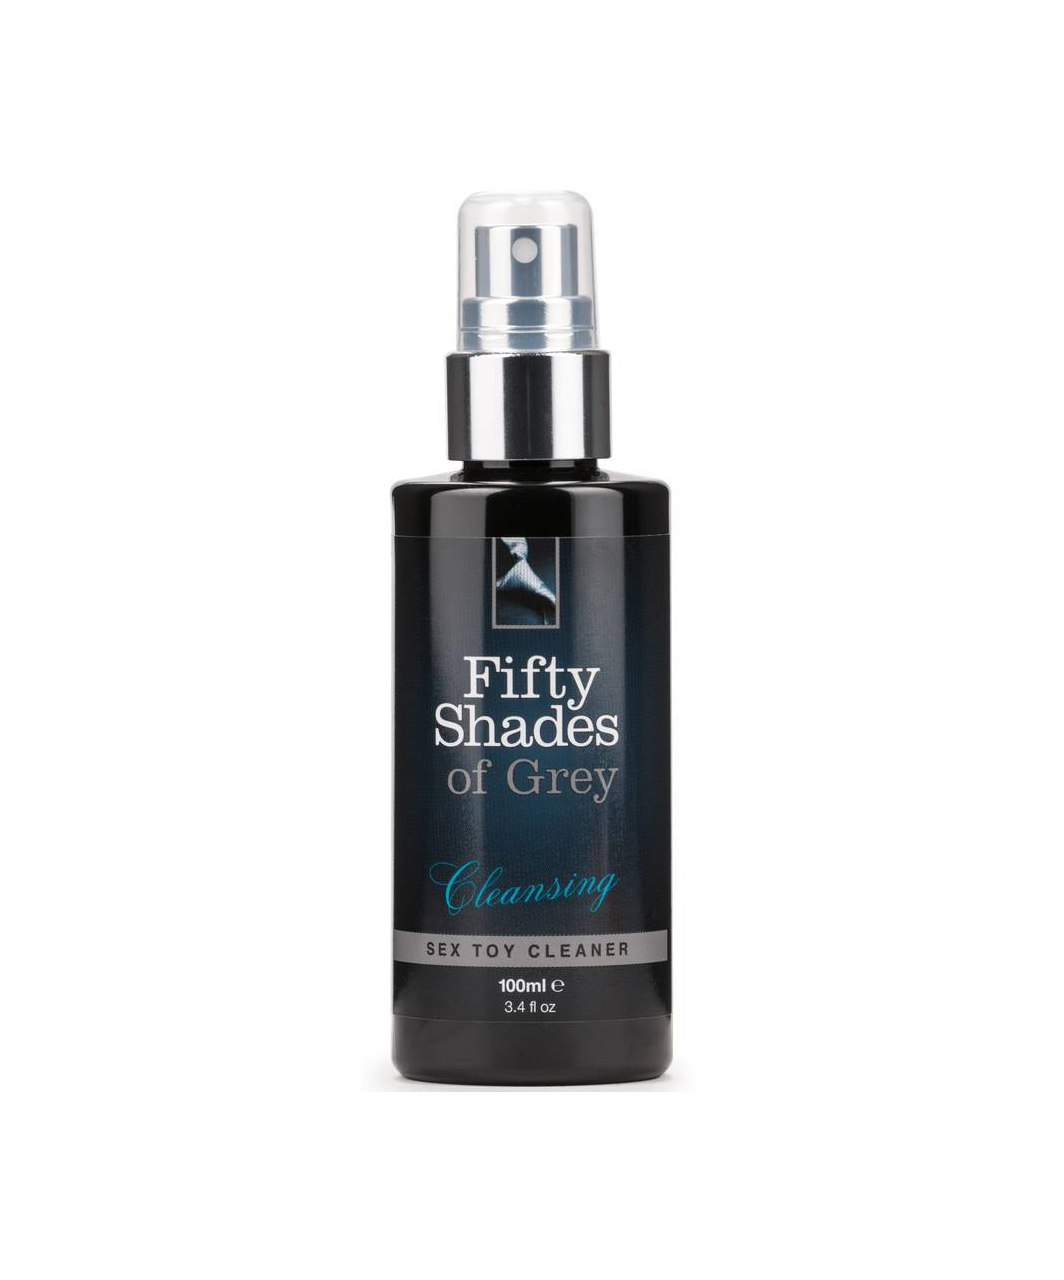 Fifty Shades of Grey Cleansing Sex Toy Cleaner (100 ml)